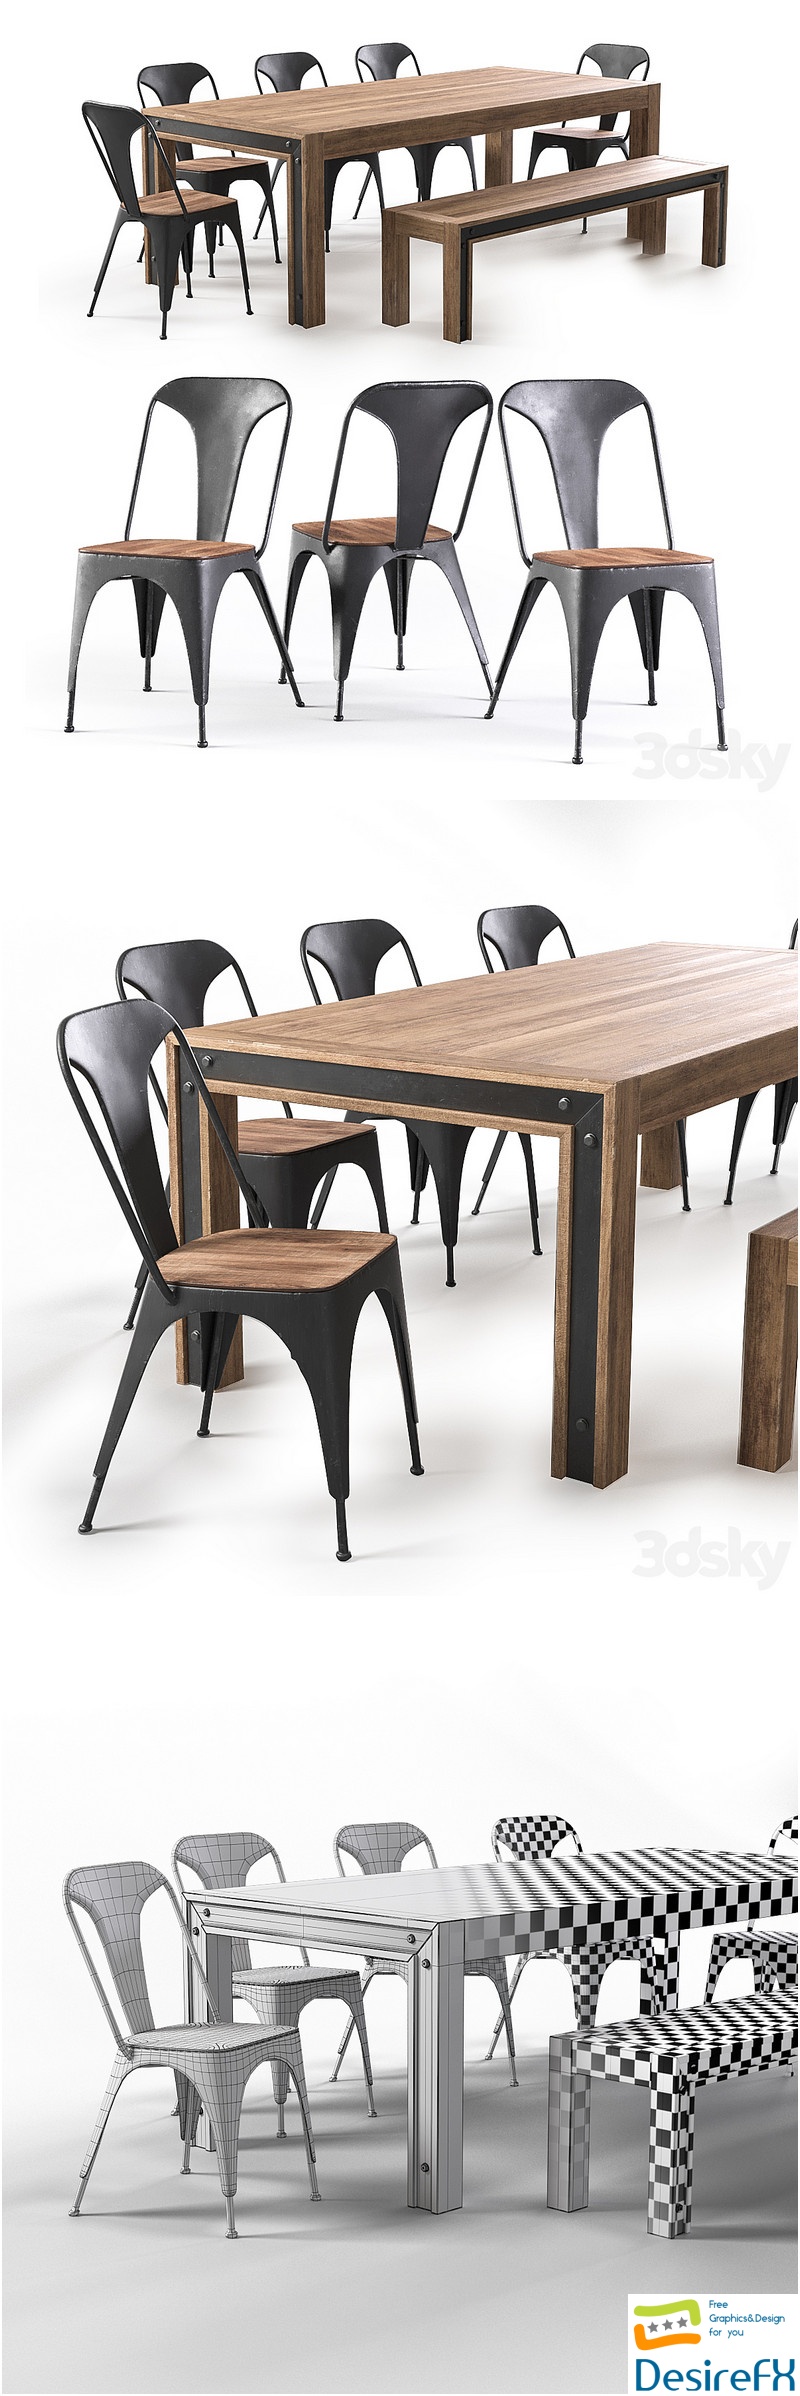 Amos table and chairs 3D Model